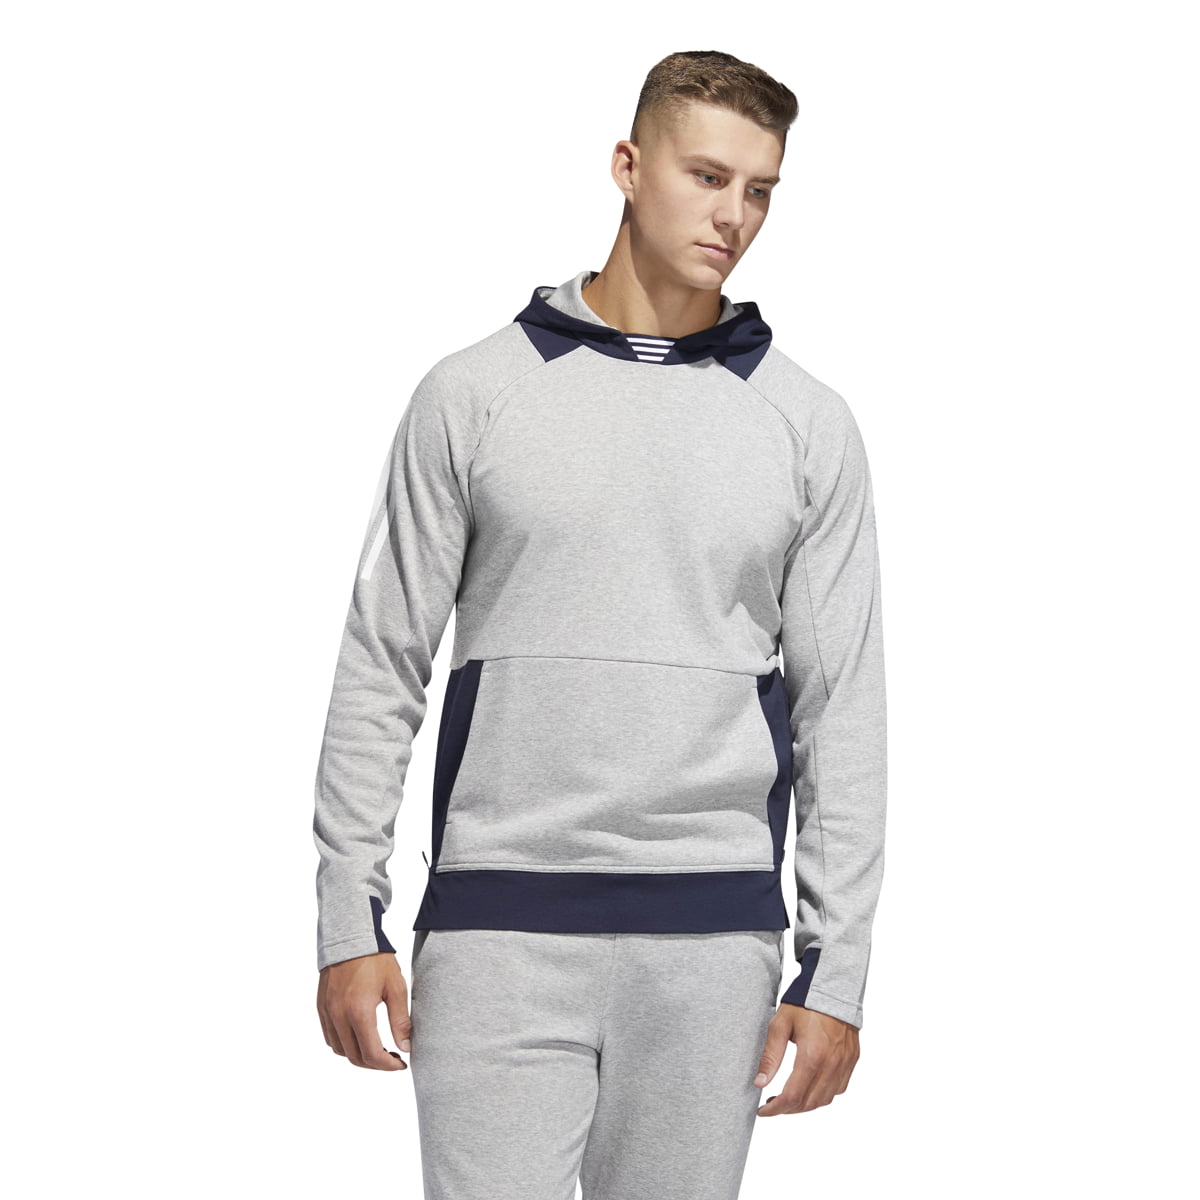 Adidas S2s Pullover Hoodie Men's Casual 